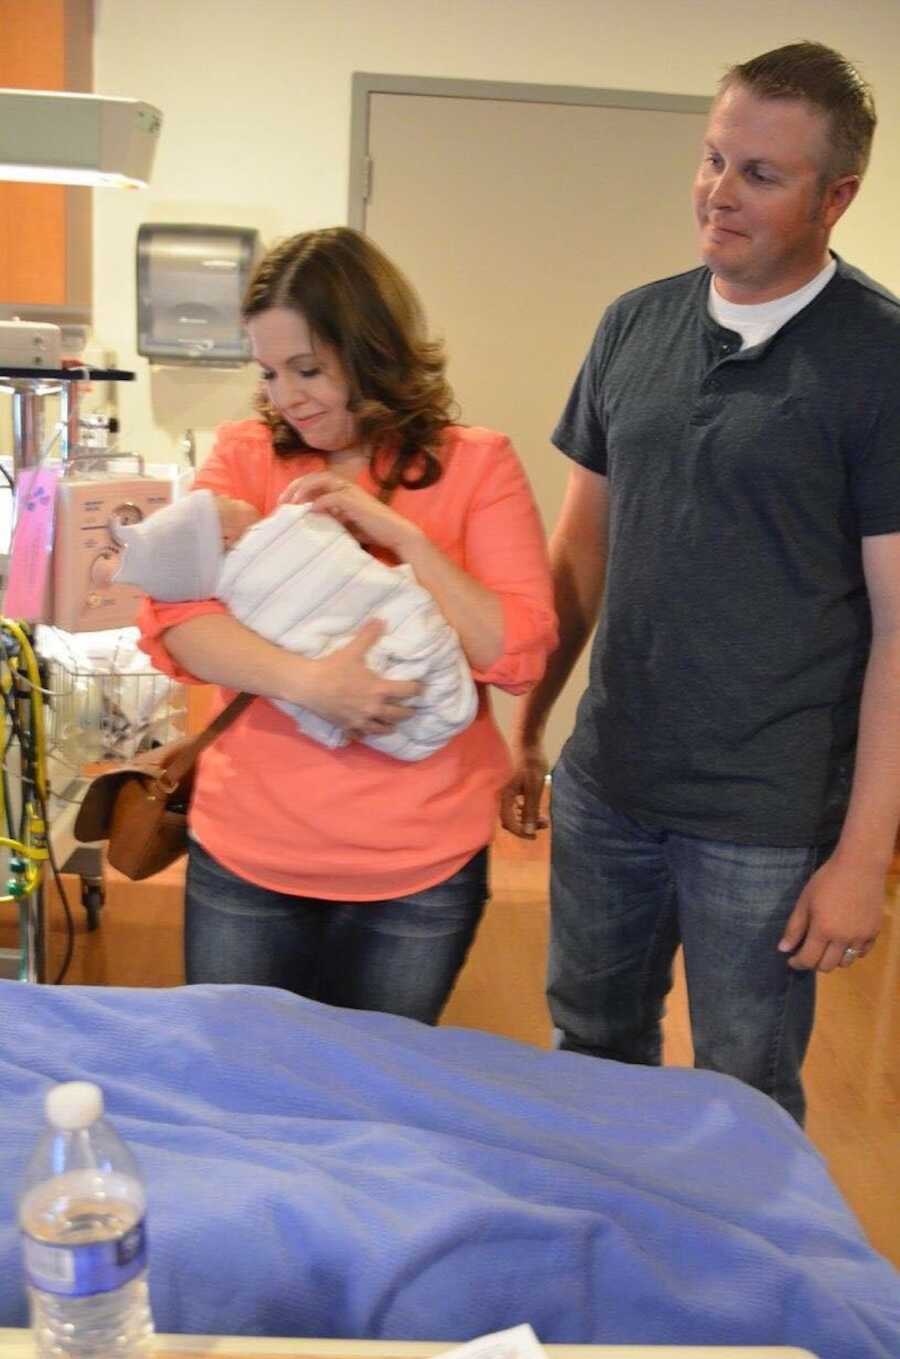 mom holds baby in hospital, dad watches